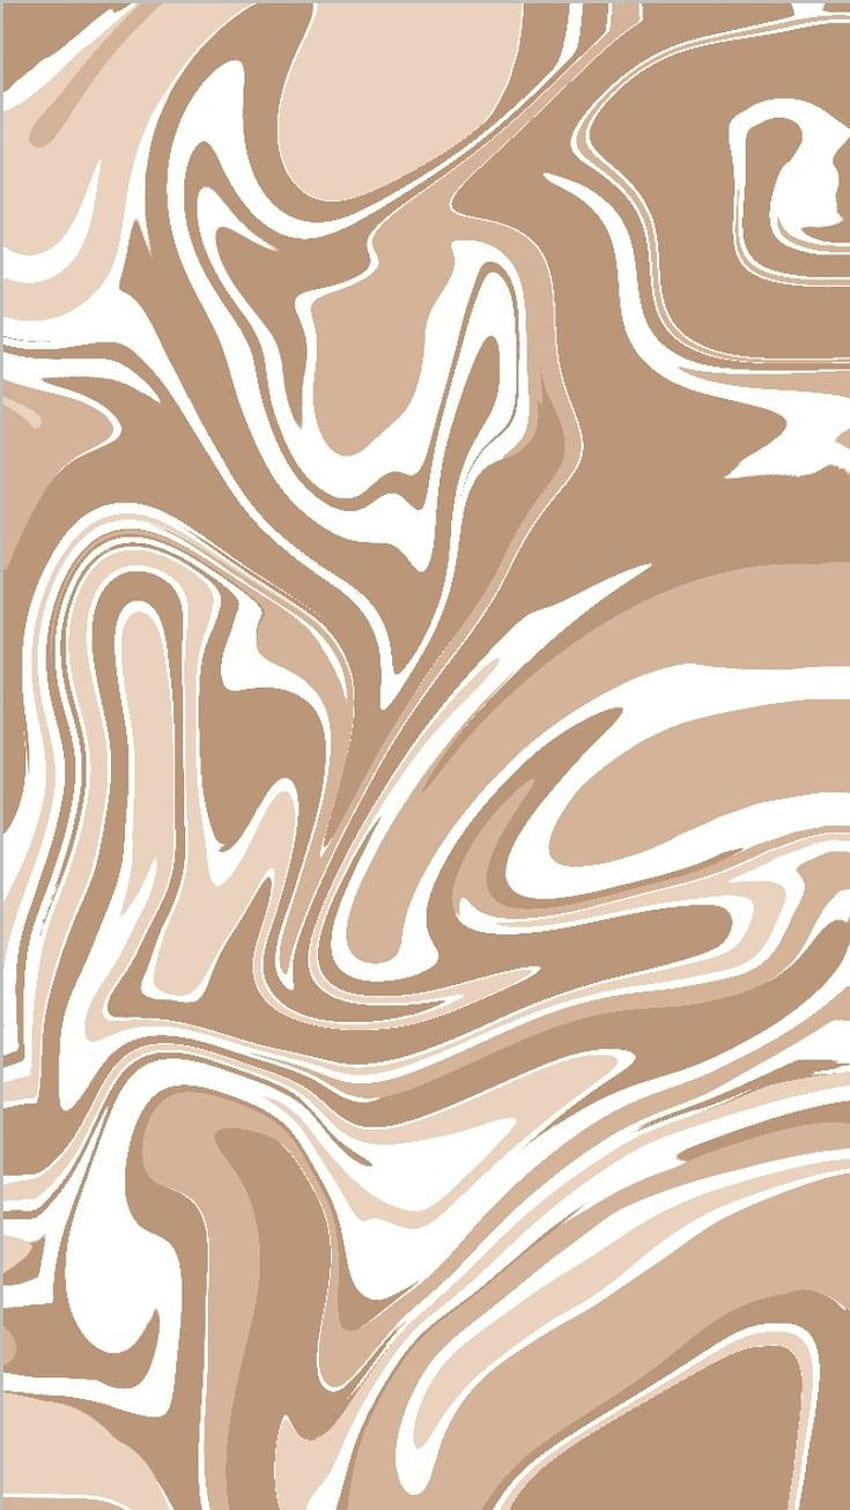 Brown in 2022. Brown , White for iphone, Cute patterns wallpap in 2022. White for iphone, Brown , かわいいパターン HD電話の壁紙